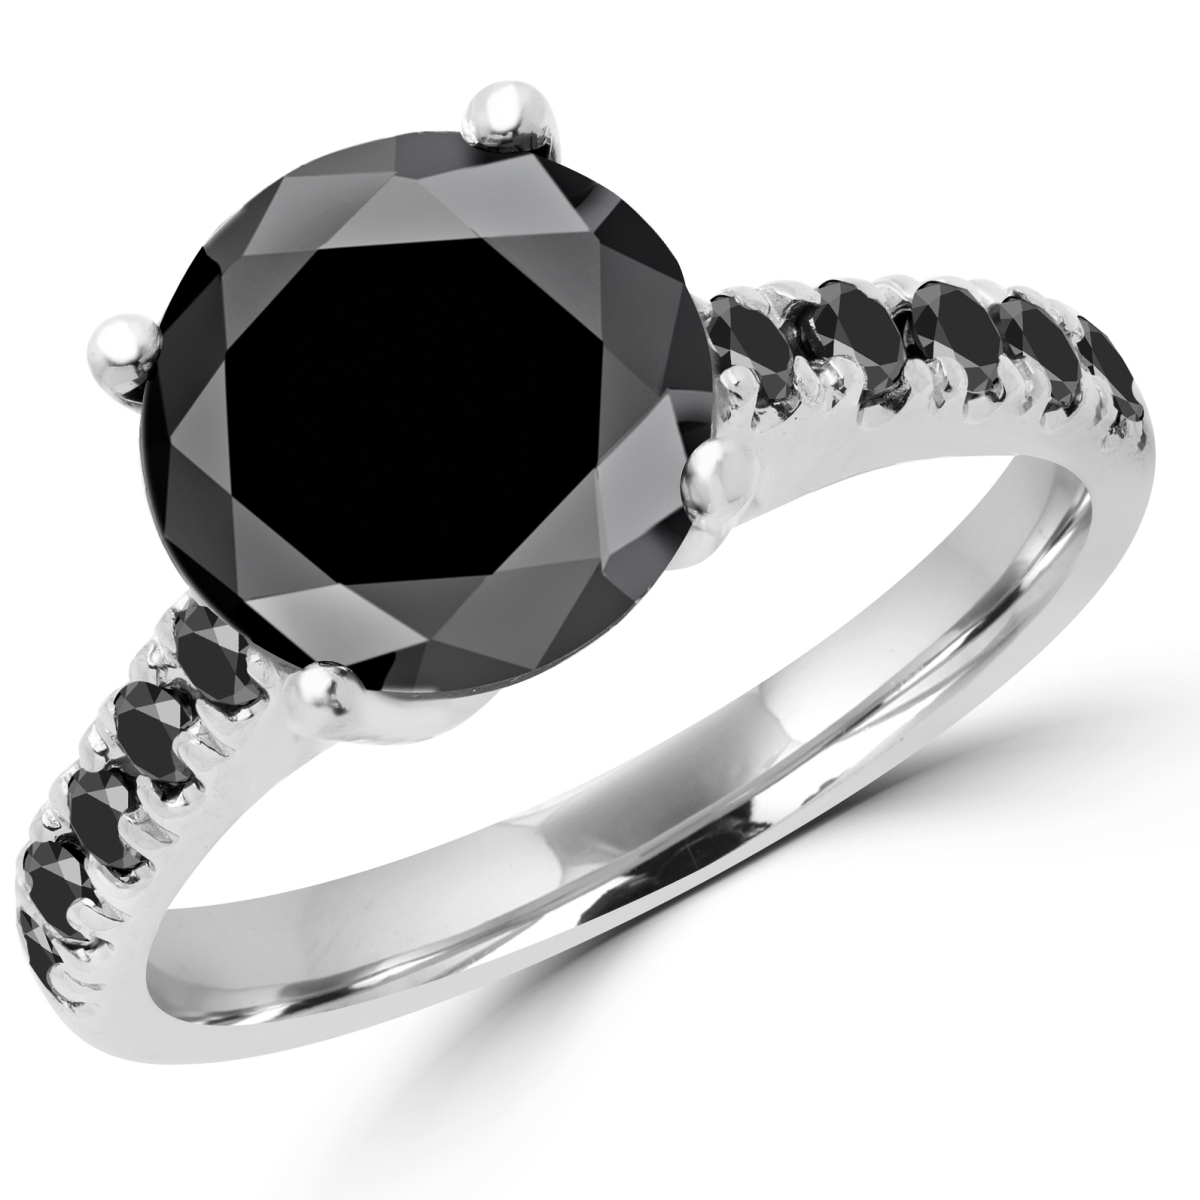 Picture of Majesty Diamonds MD190072-P 3.6 CTW Round Black Diamond Solitaire with Accents Engagement Ring in 18K White Gold